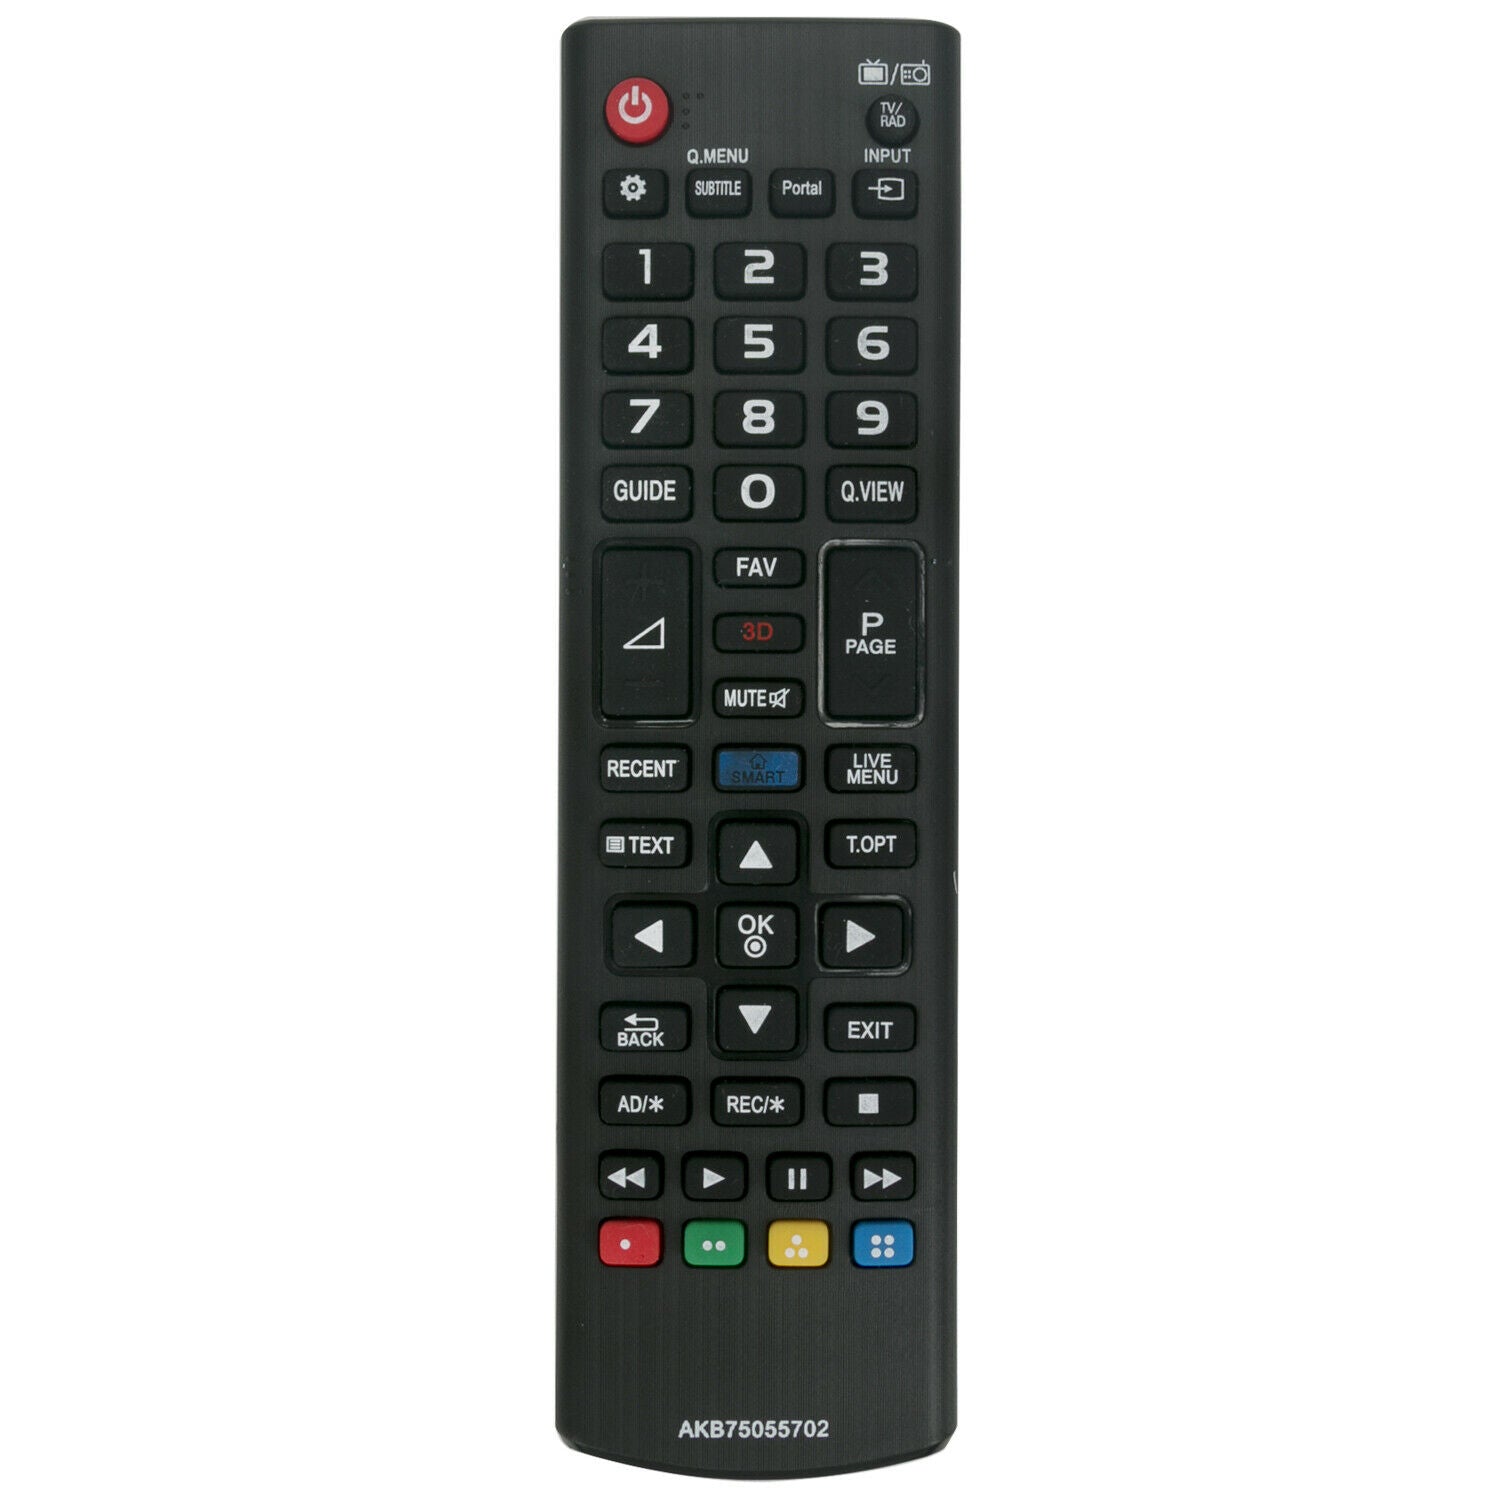 AKB75055702 Replacement Remote Control for LG Smart HD LED TV Replaces AKB74475472